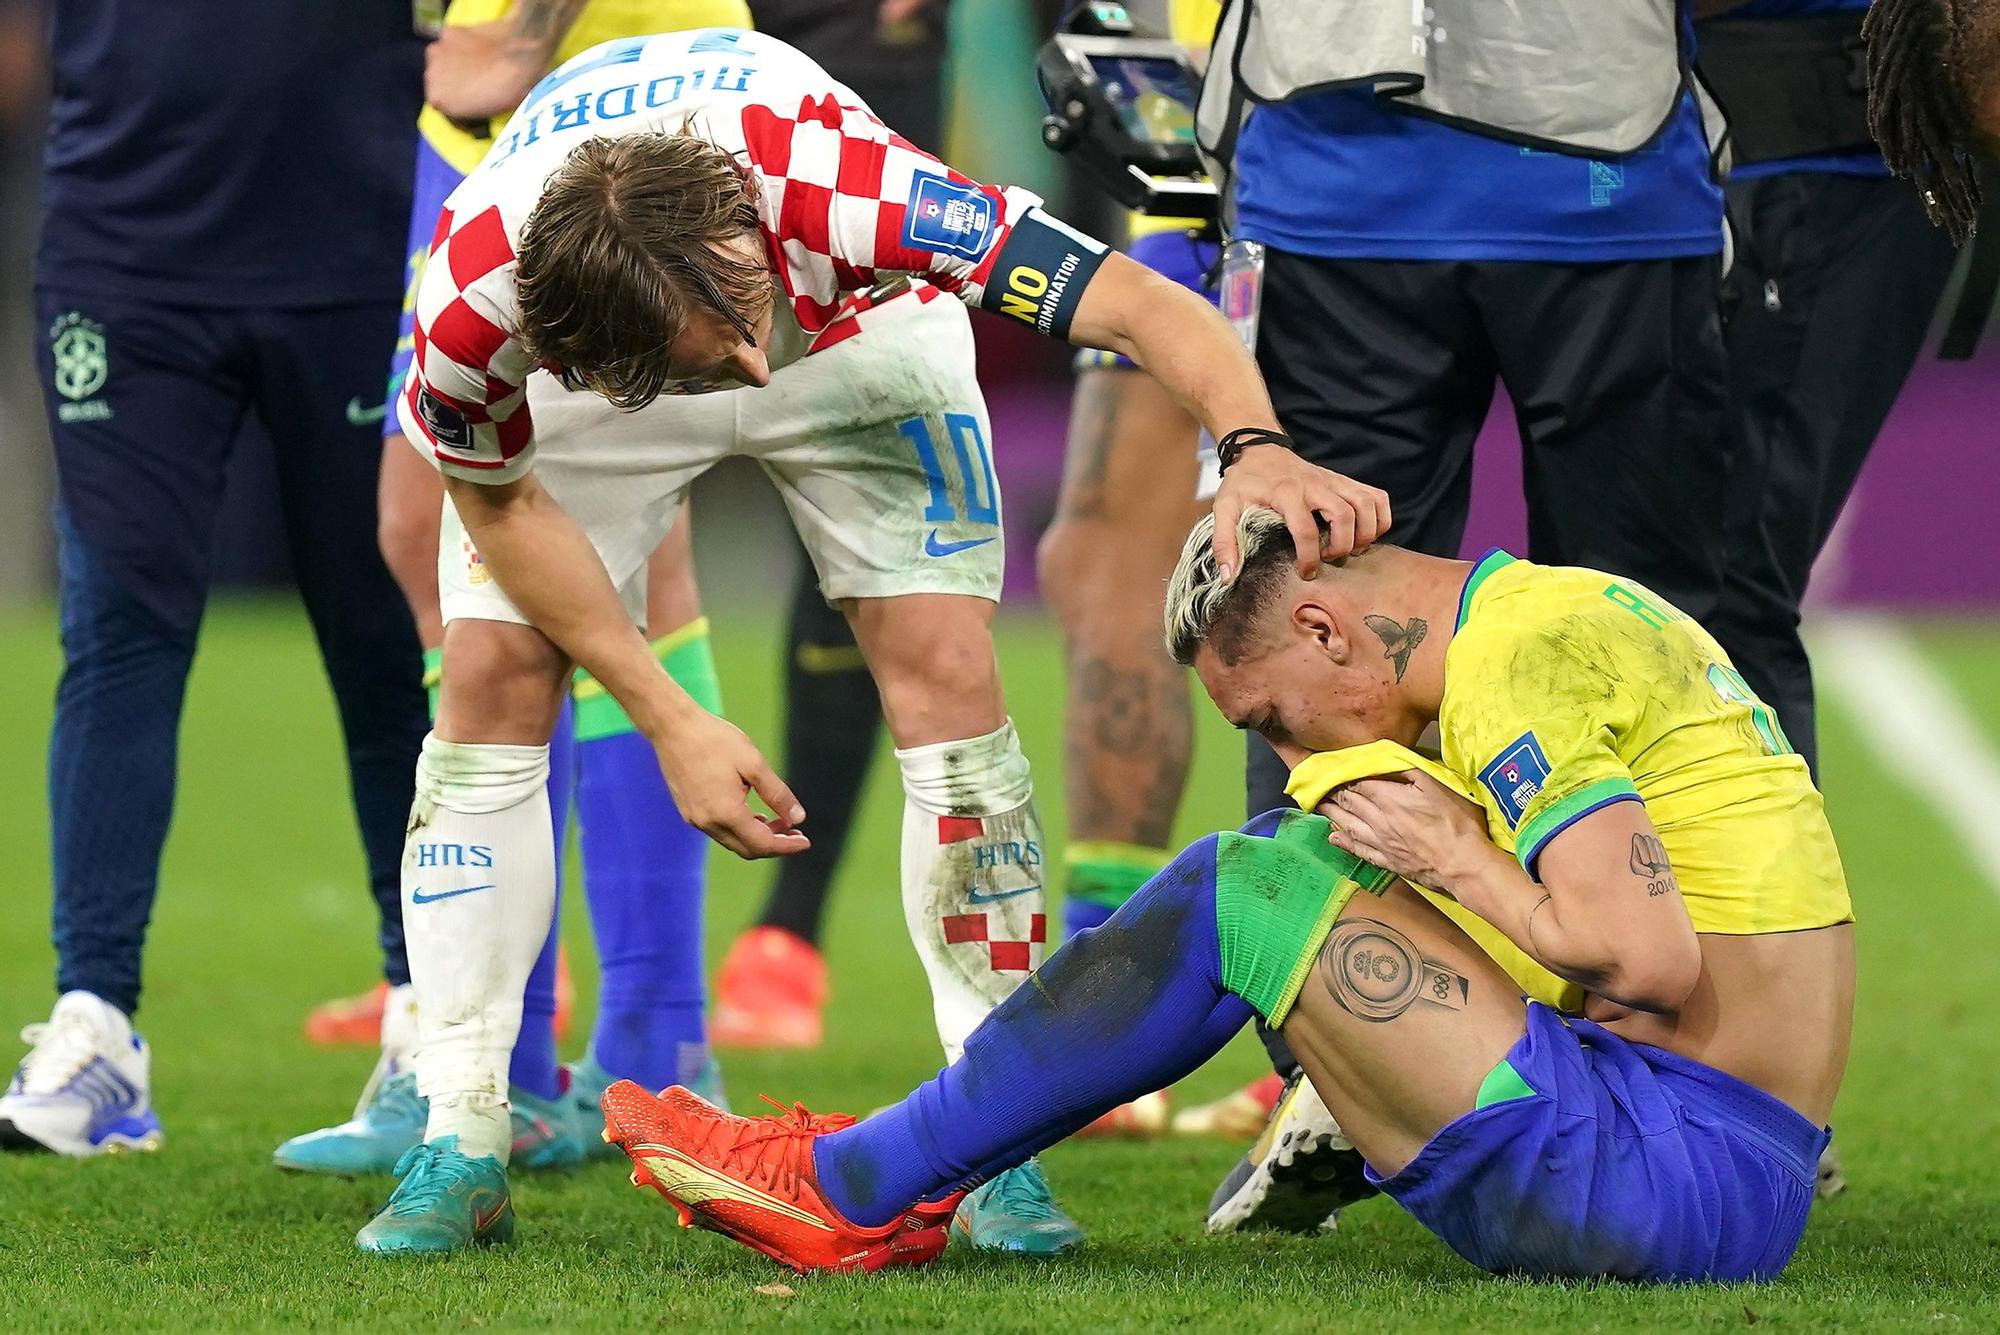 Brazil's Antony (R) is consoled by Croatia's Luka Modric after the penalty shoot-out of the FIFA World Cup Qatar 2022 Quarter-Final soccer match between Croatia and Brazil at the Education City Stadium in Al Rayyan.